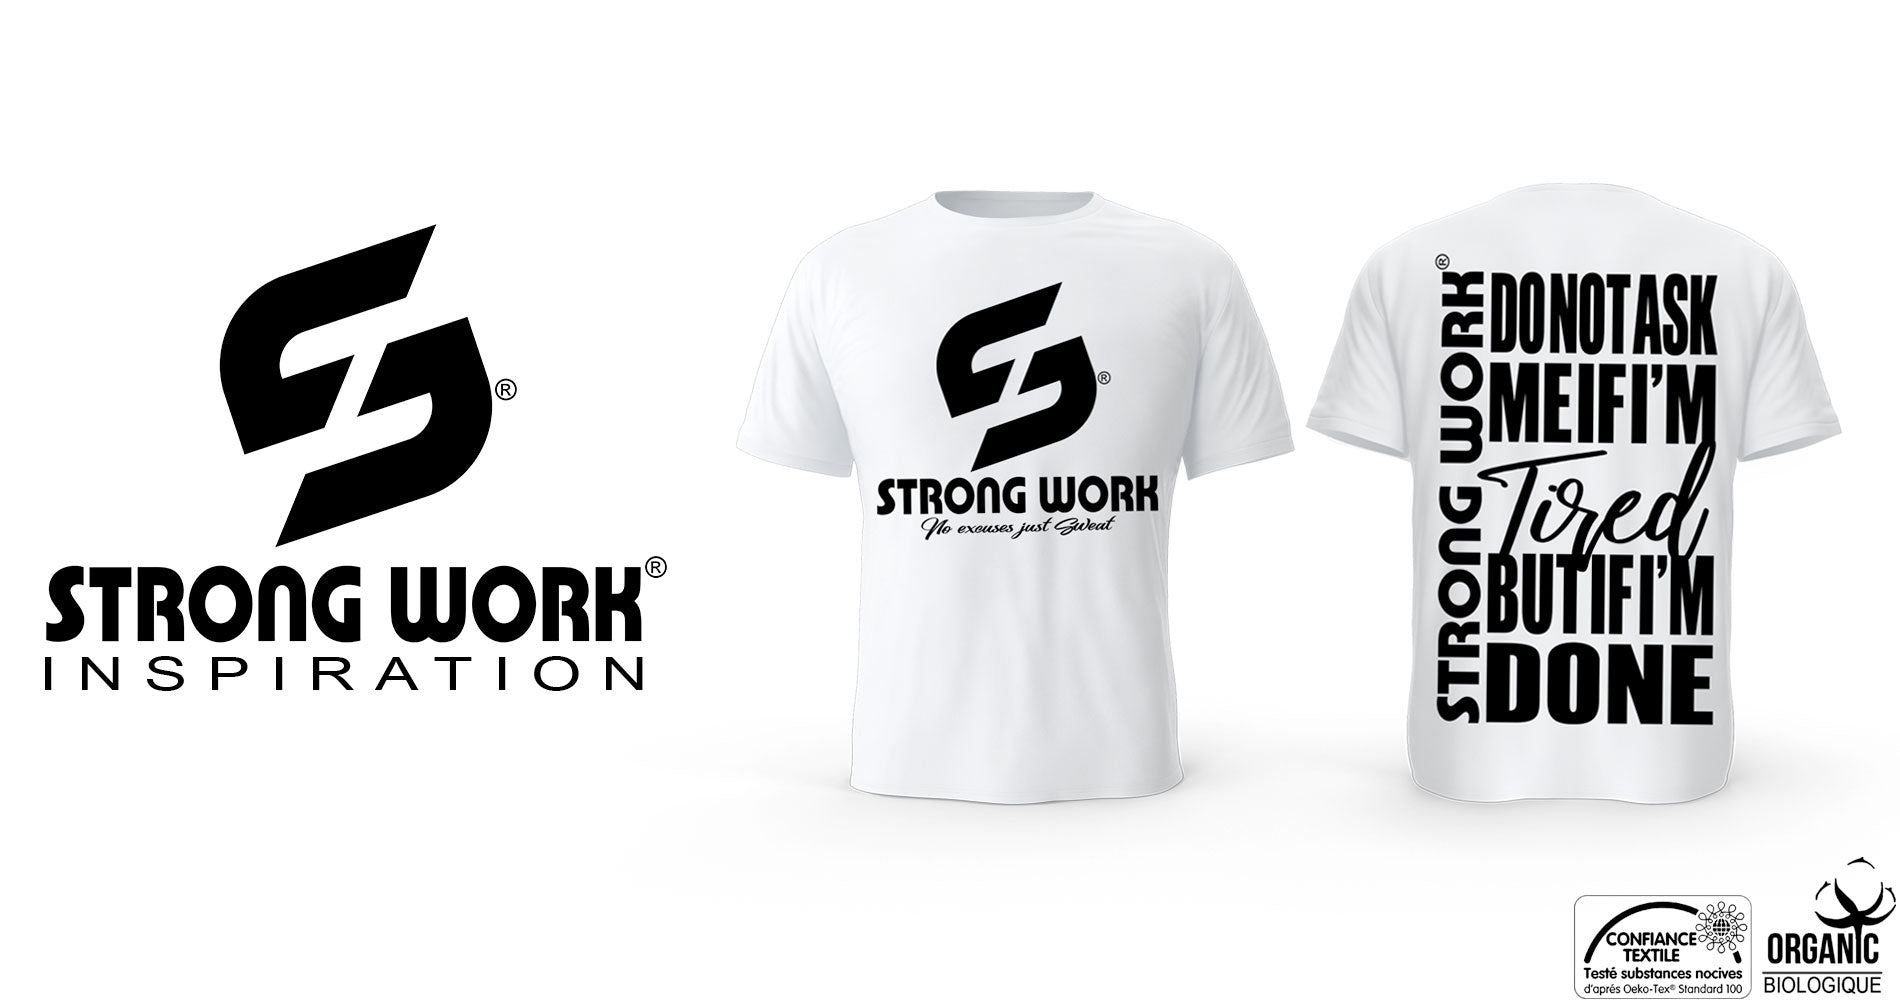 STRONG WORK DO NOT ASK ME IF I'M TIRED BUT IF I'M DONE T-SHIRT FOR MEN - ORGANIC SPORTSWEAR - ORGANIC COTTON